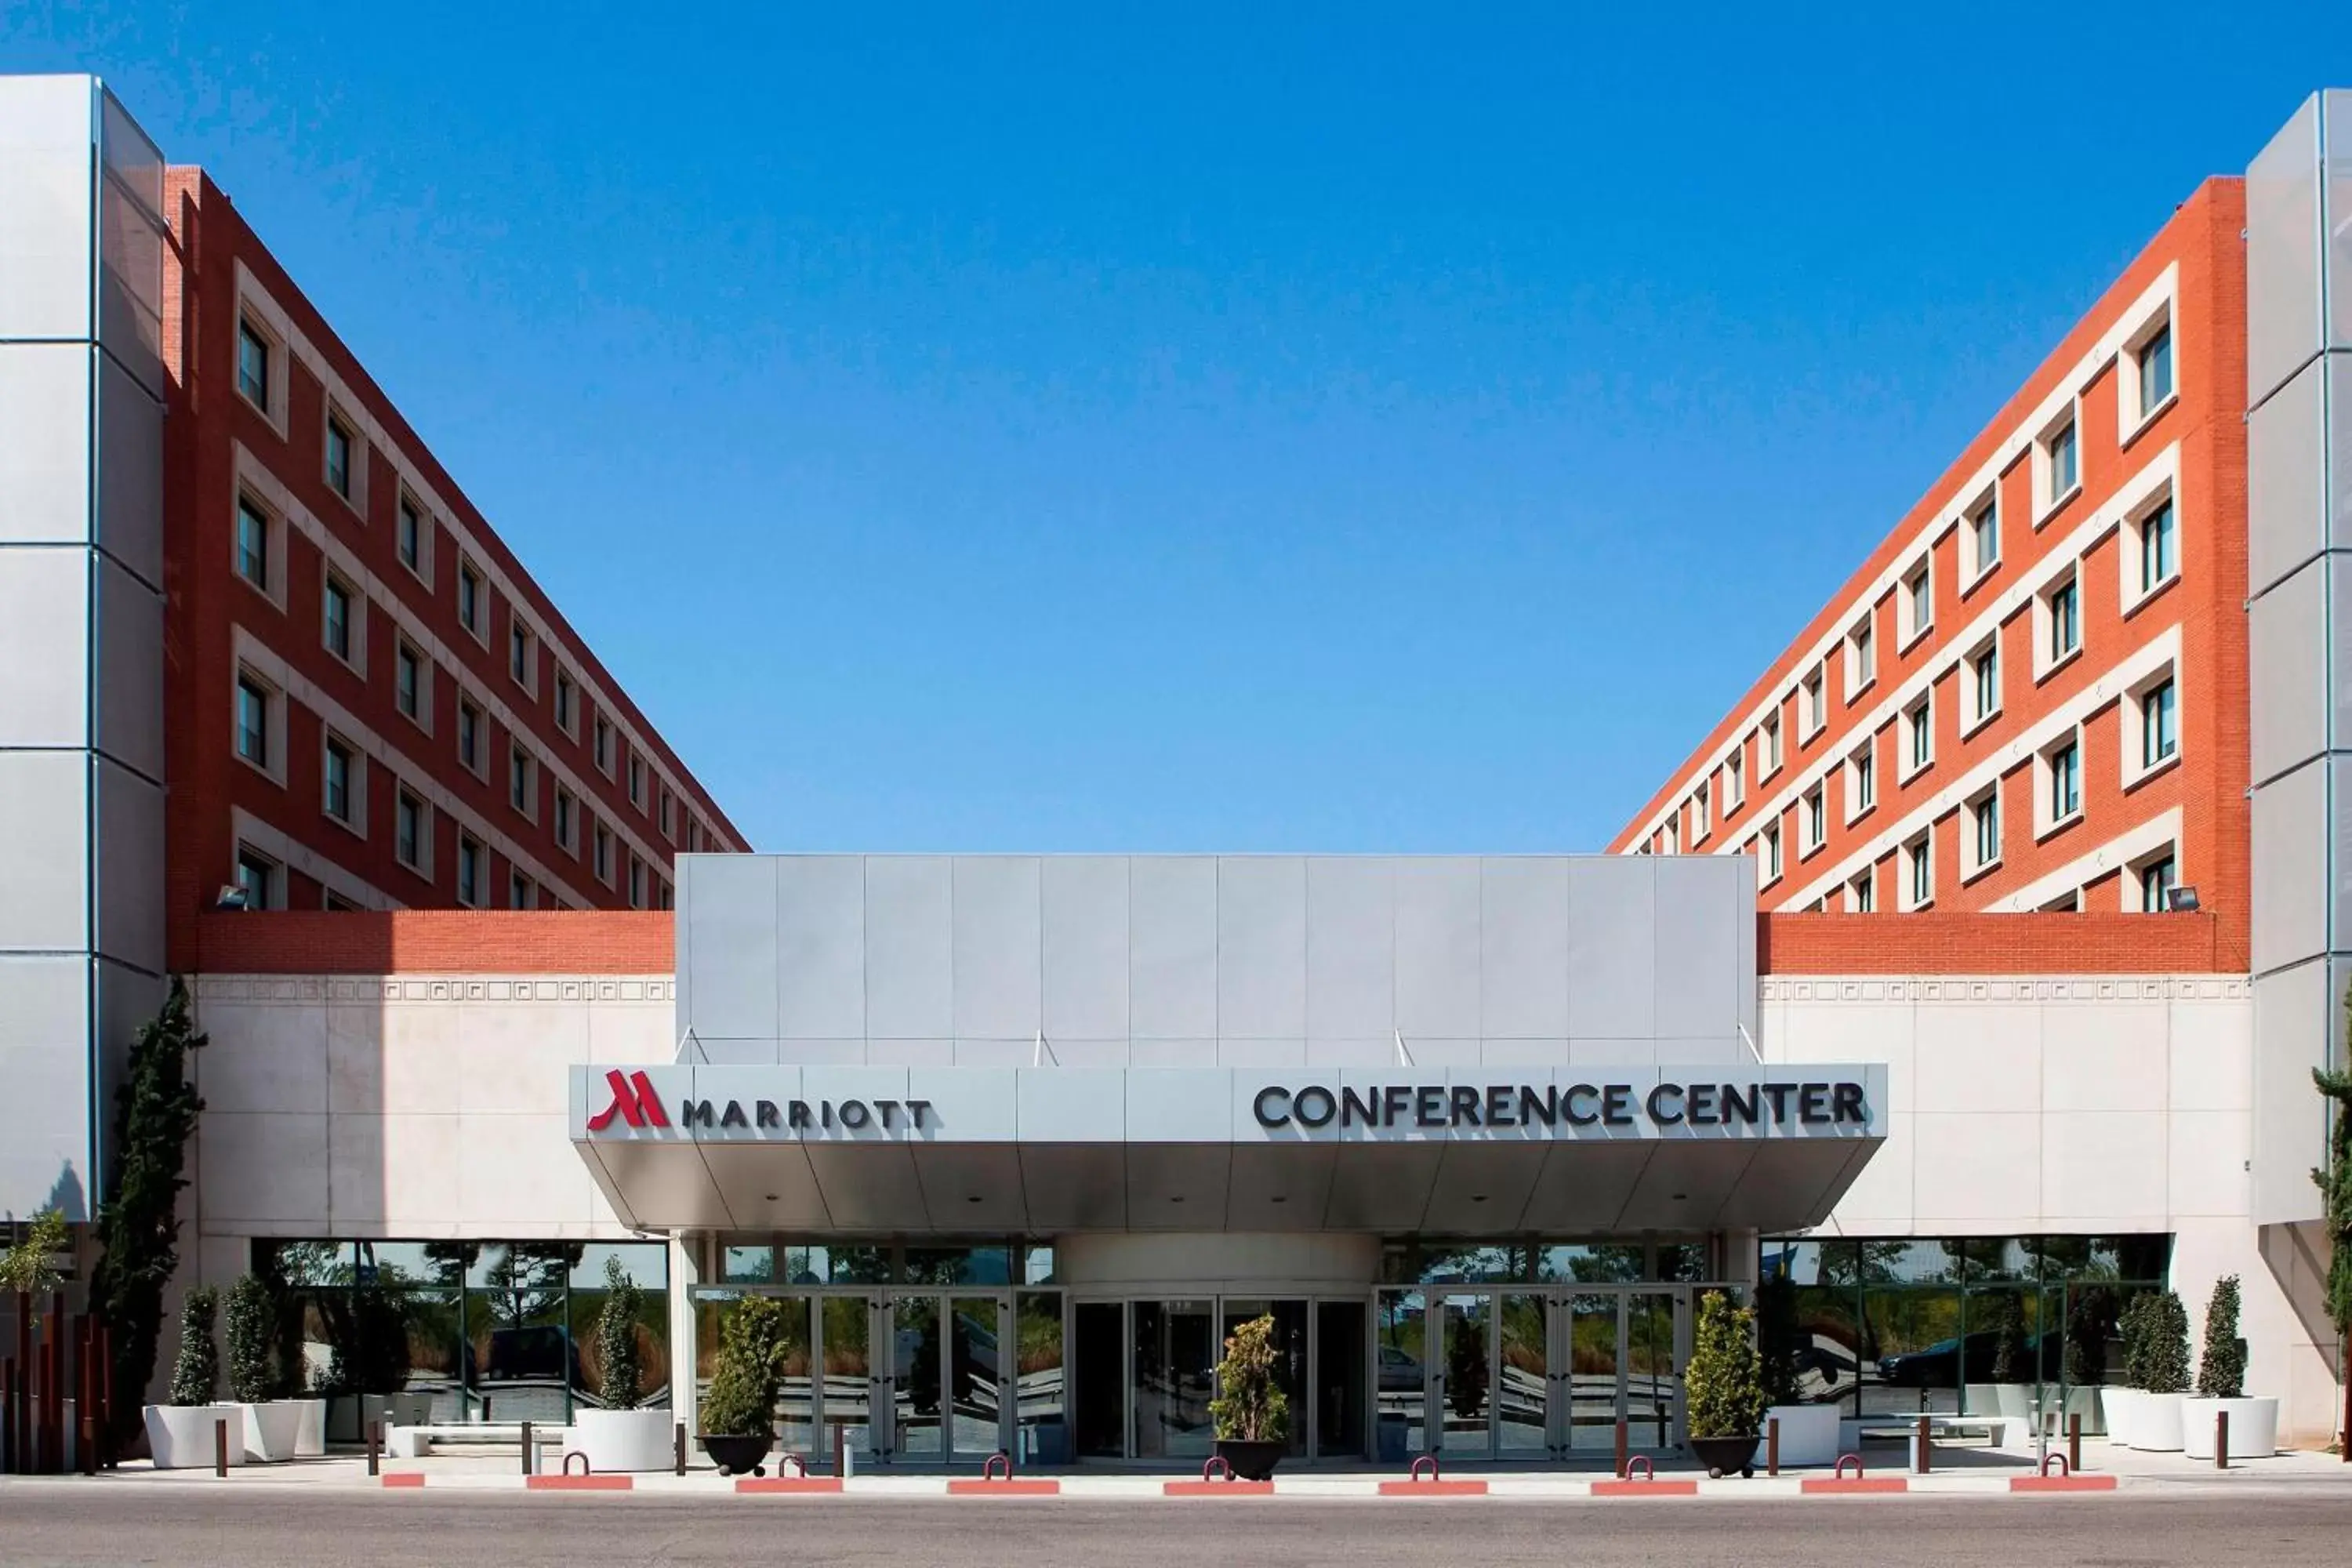 Property building in Madrid Marriott Auditorium Hotel & Conference Center